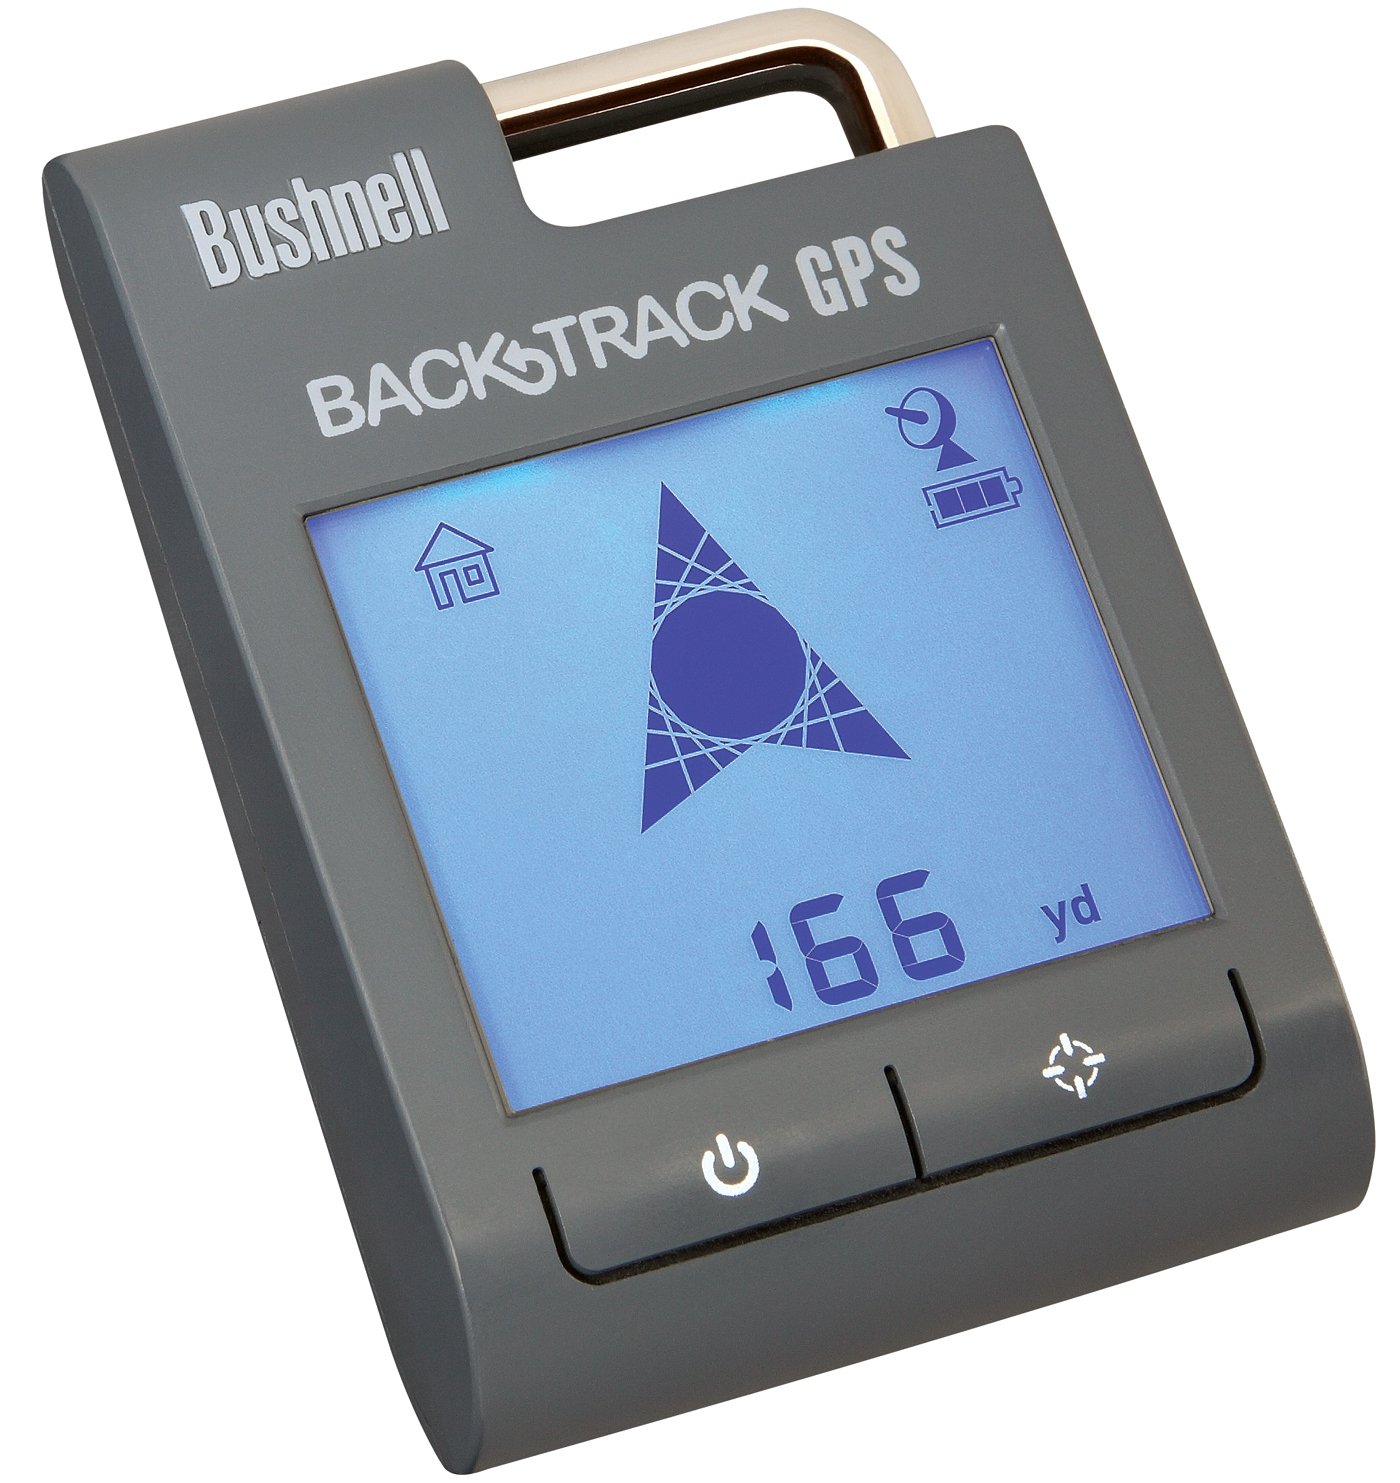 BUSHNELL BACKTRACK POINT-3 PERSONAL GPS